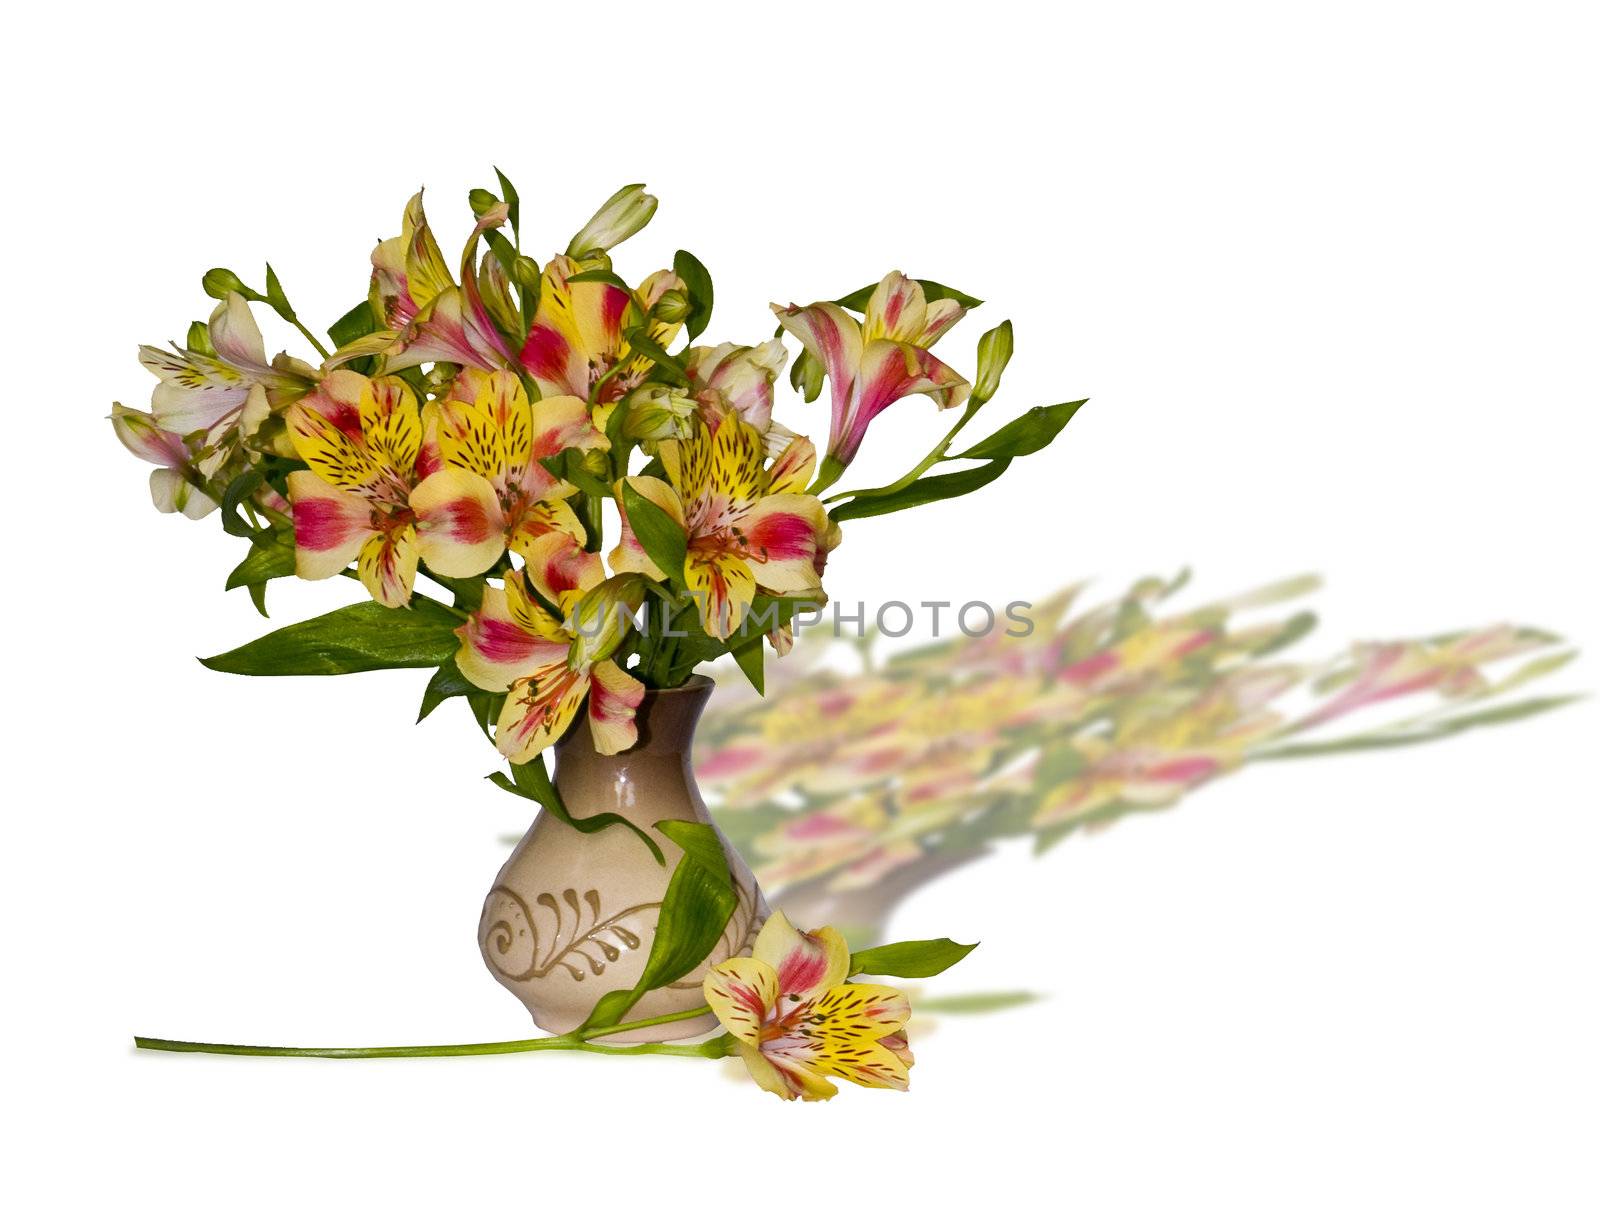 the isolated image of a bouquet in a vase